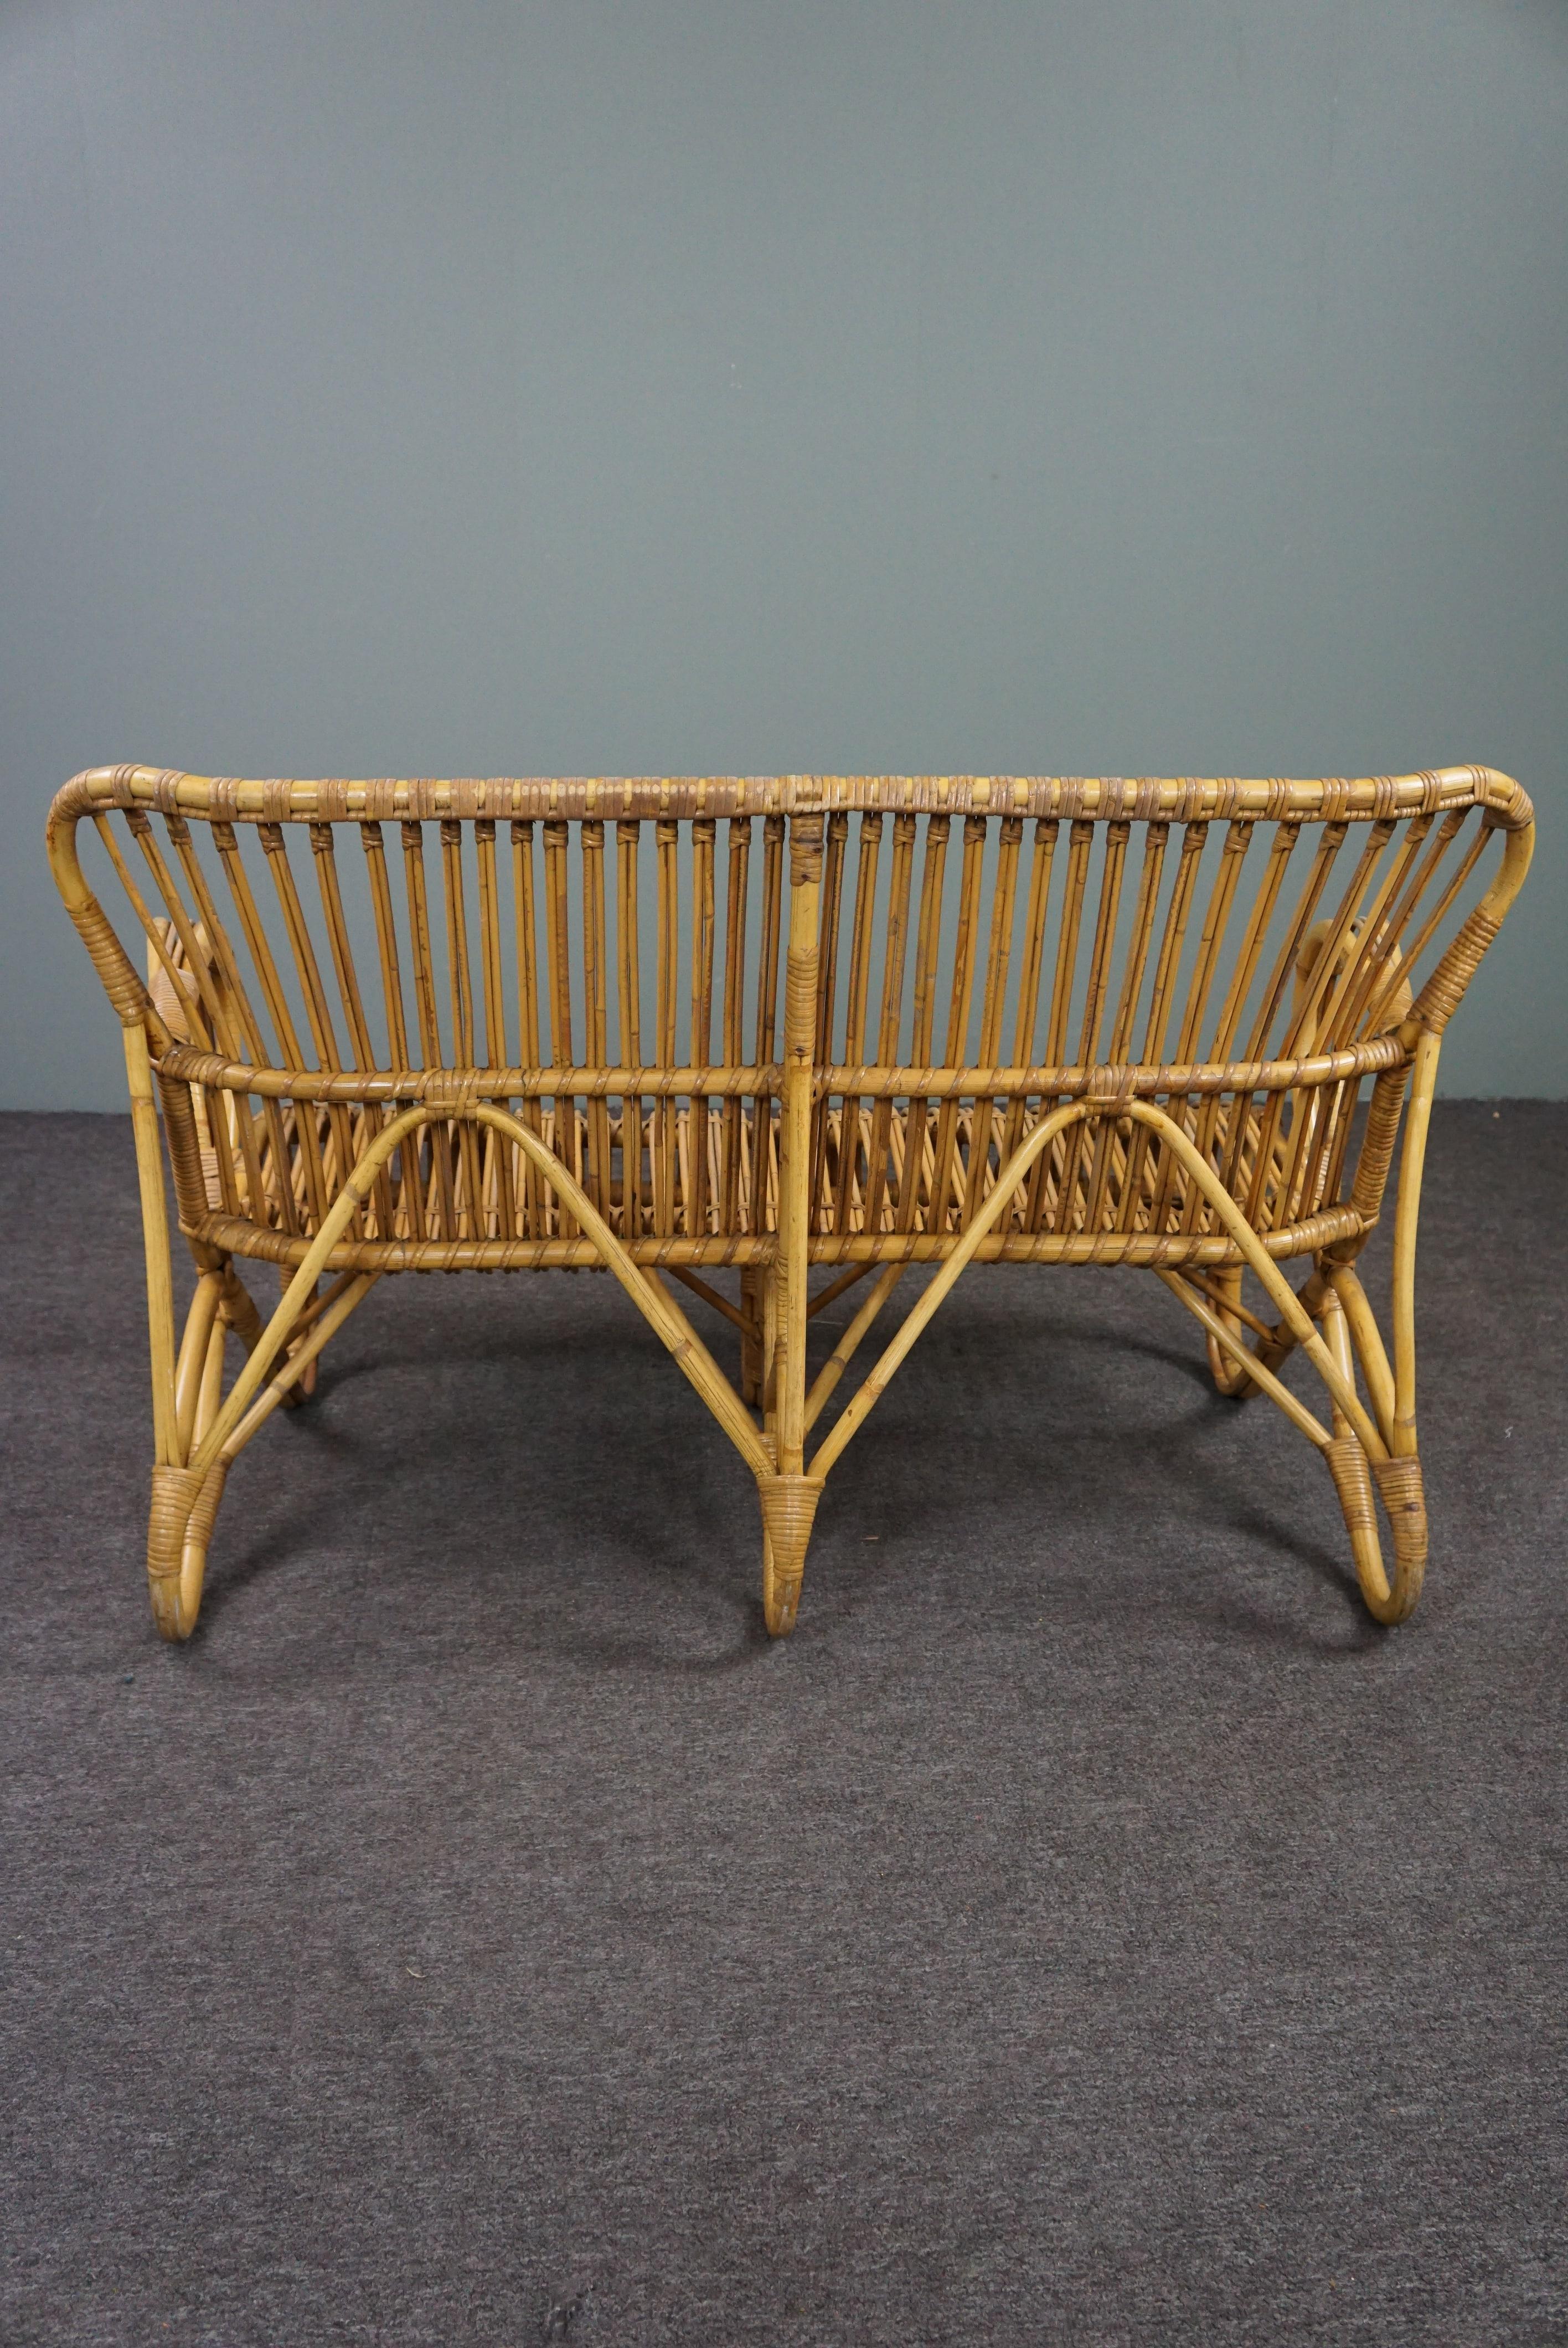 Hand-Crafted Midcentury rattan Belse 8, 2 seater sofa, Dutch Design, 1950 For Sale